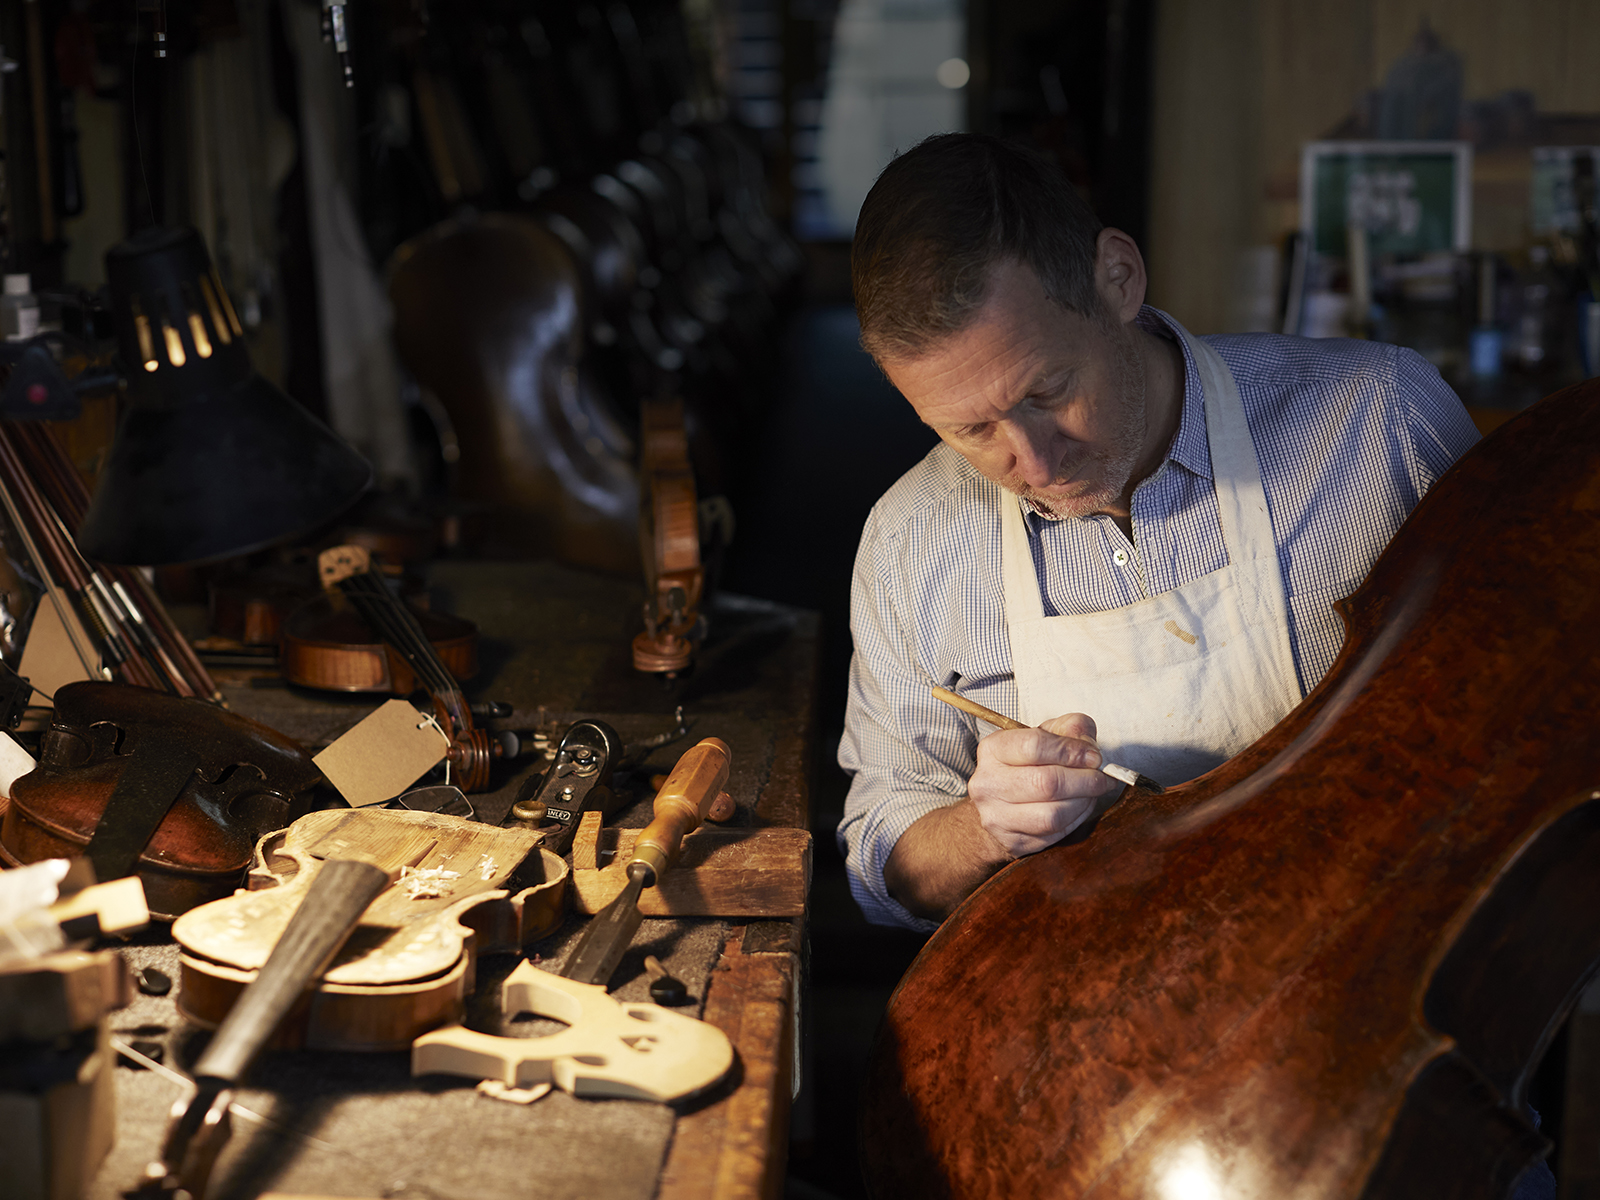 Violin maker Russell Stowe works on a cello by lamplight